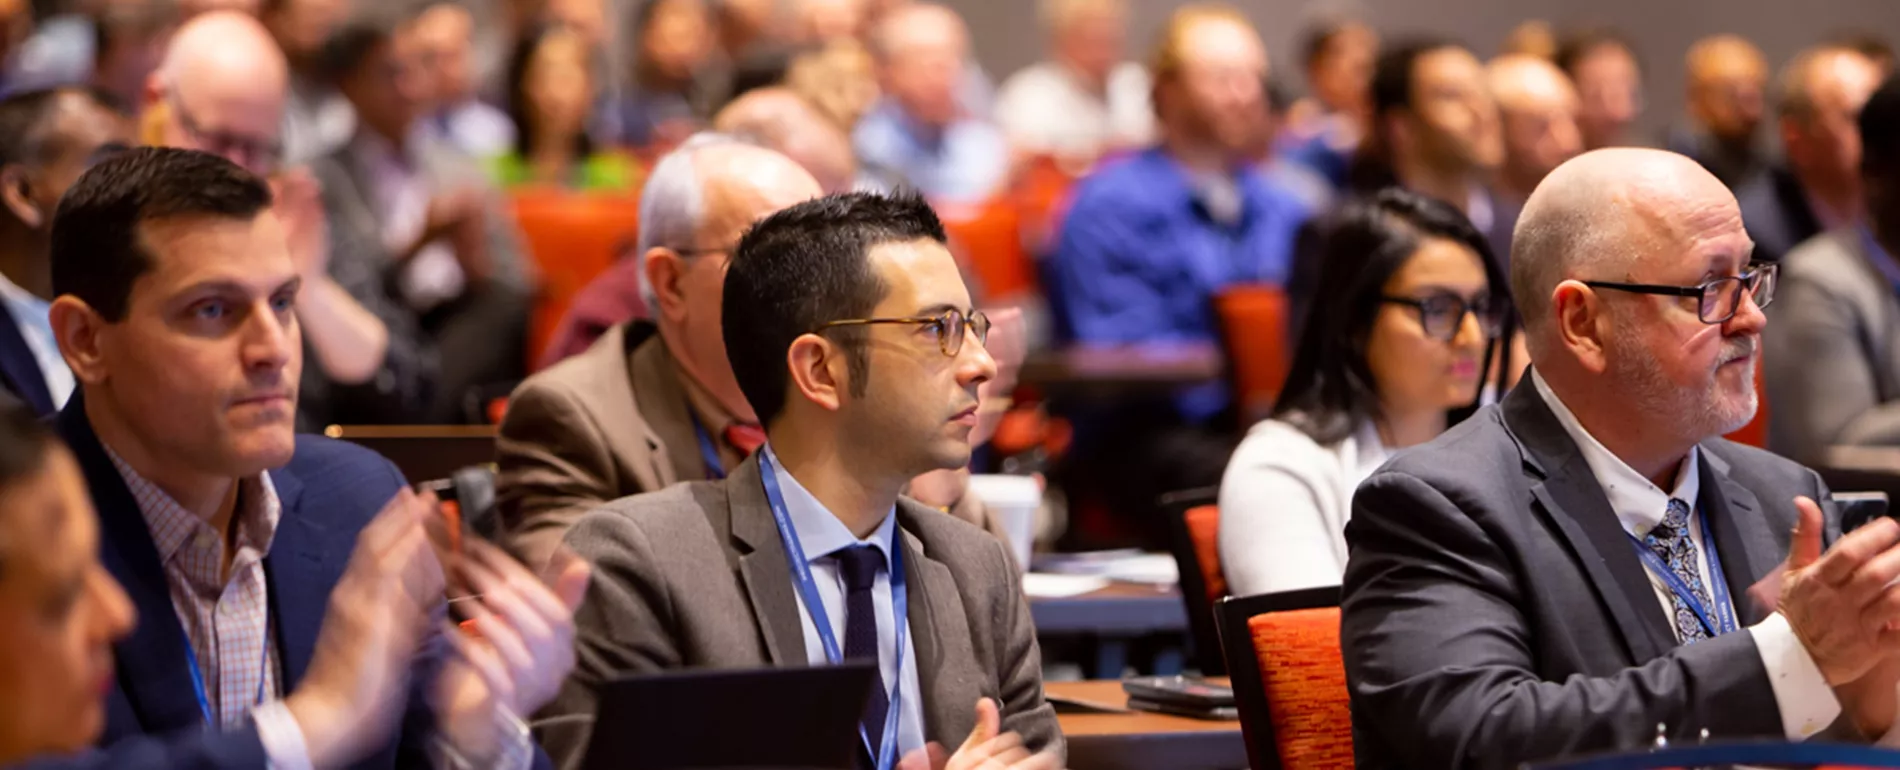 2019 ISPE Aseptic Conference - Event Banner Image